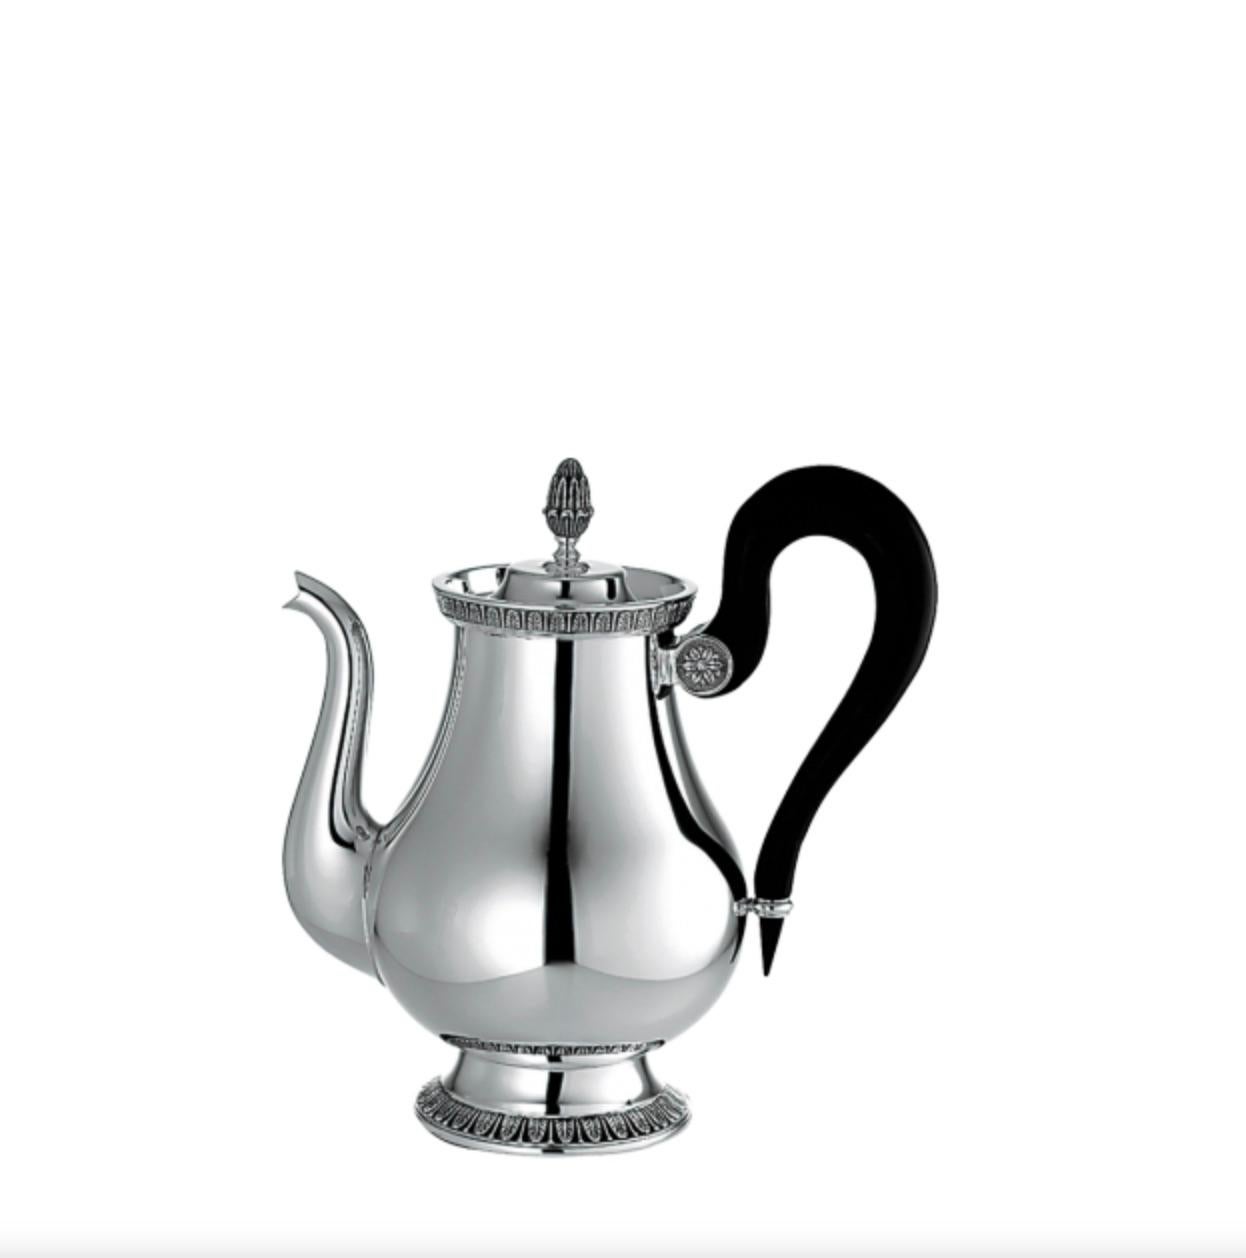 Set elegant table with teapot in the Christofle Malmaison pattern. One of Christofle's most historic patterns, Malmaison typifies the Empire style, with its frieze of delicate palm and lotus leaves and symmetrical design. The name is a nod to the